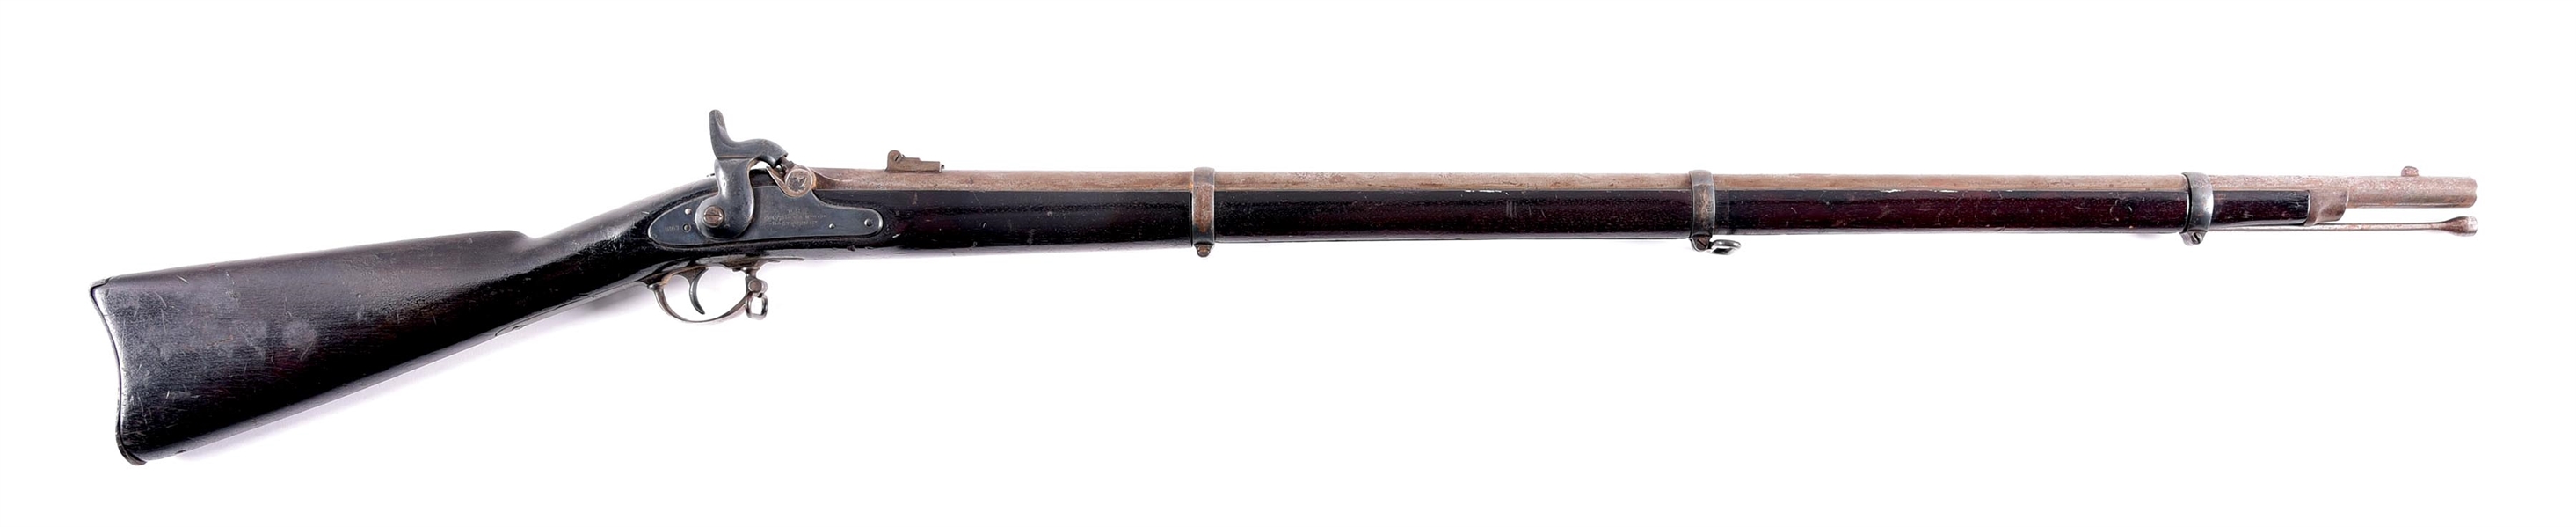 (A) COLT MODEL 1863 PERCUSSION RIFLED MUSKET.